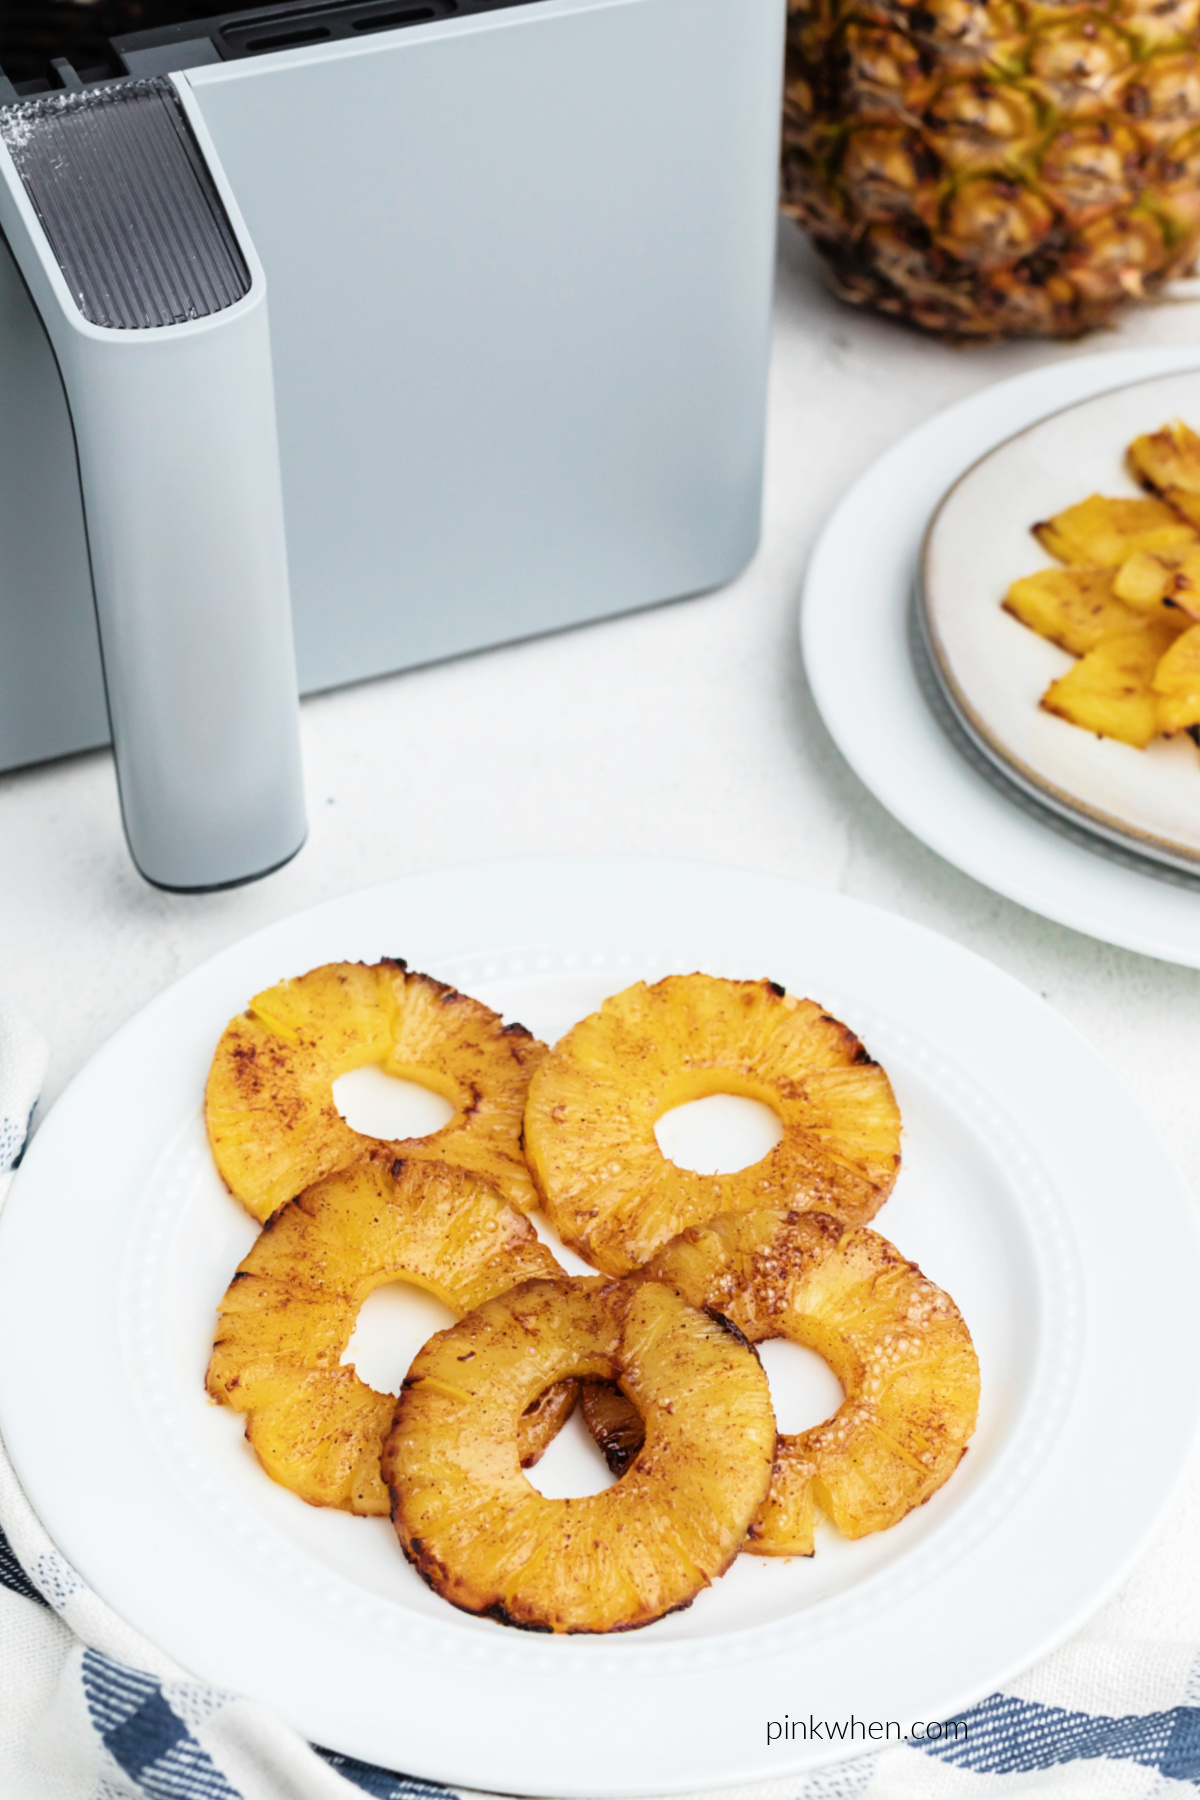 Air fried pineapple on a white plate, ready to serve.